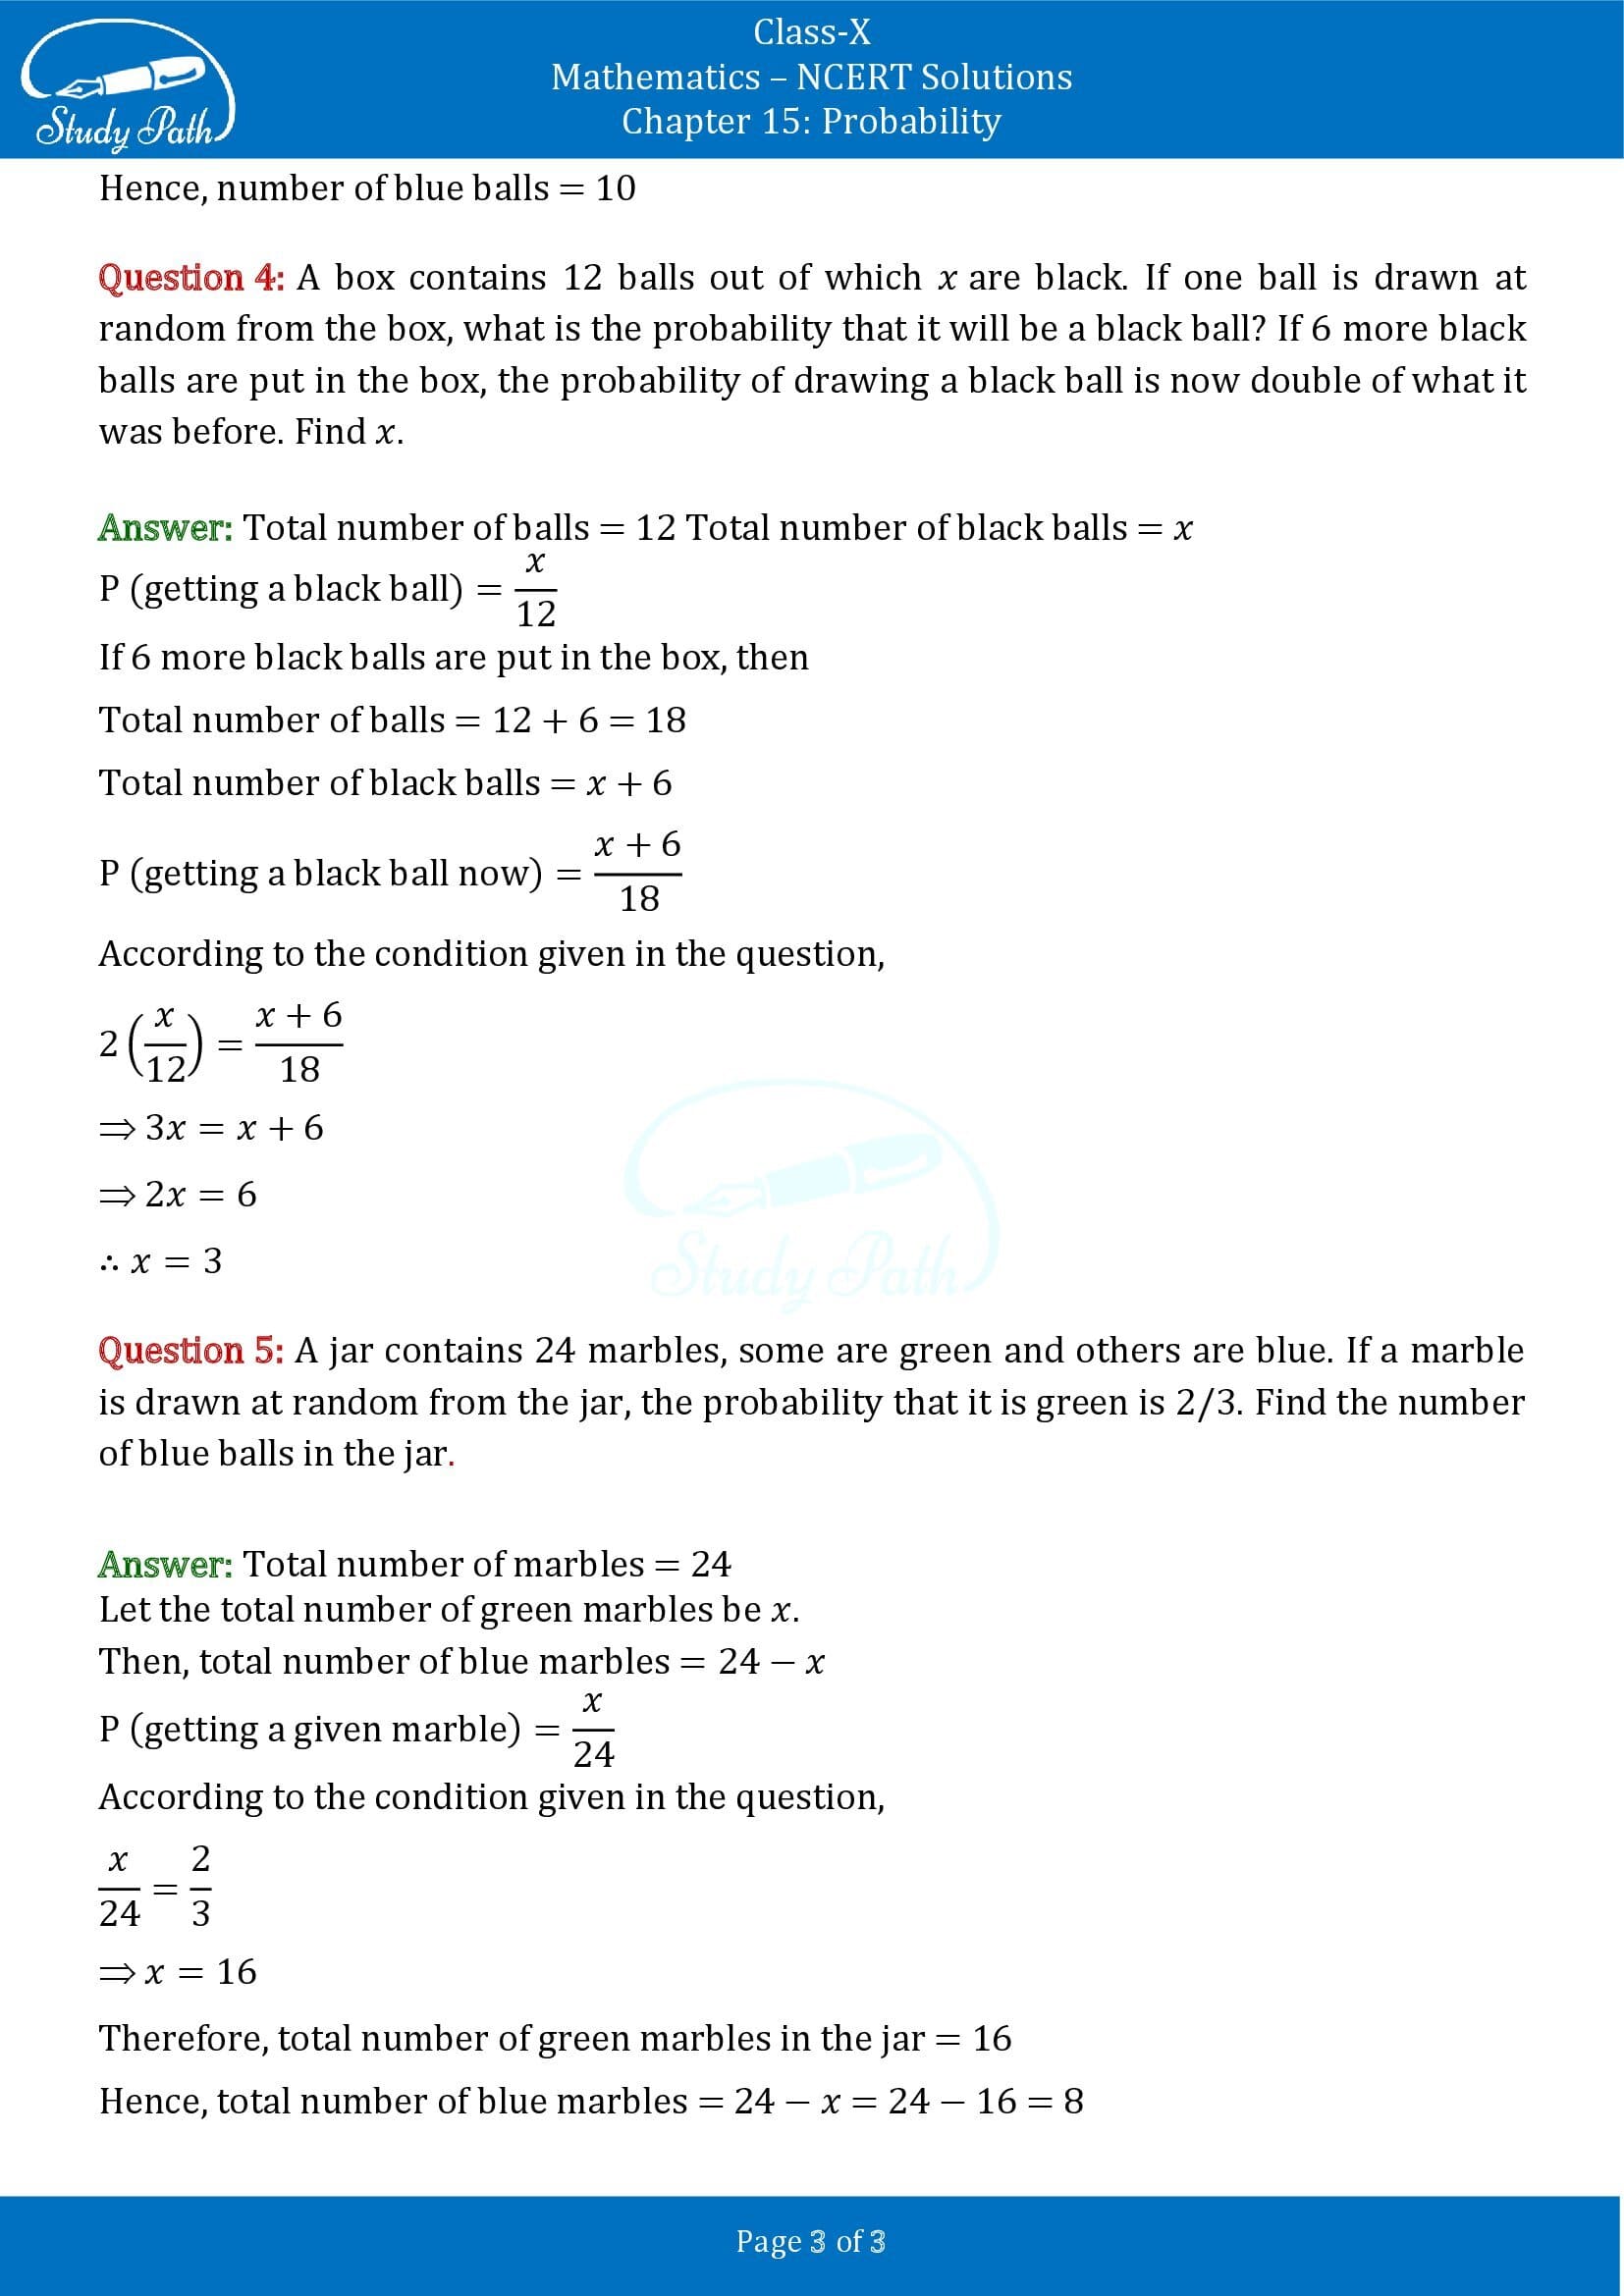 NCERT Solutions for Class 10 Maths Chapter 15 Probability Exercise 15.2 00003